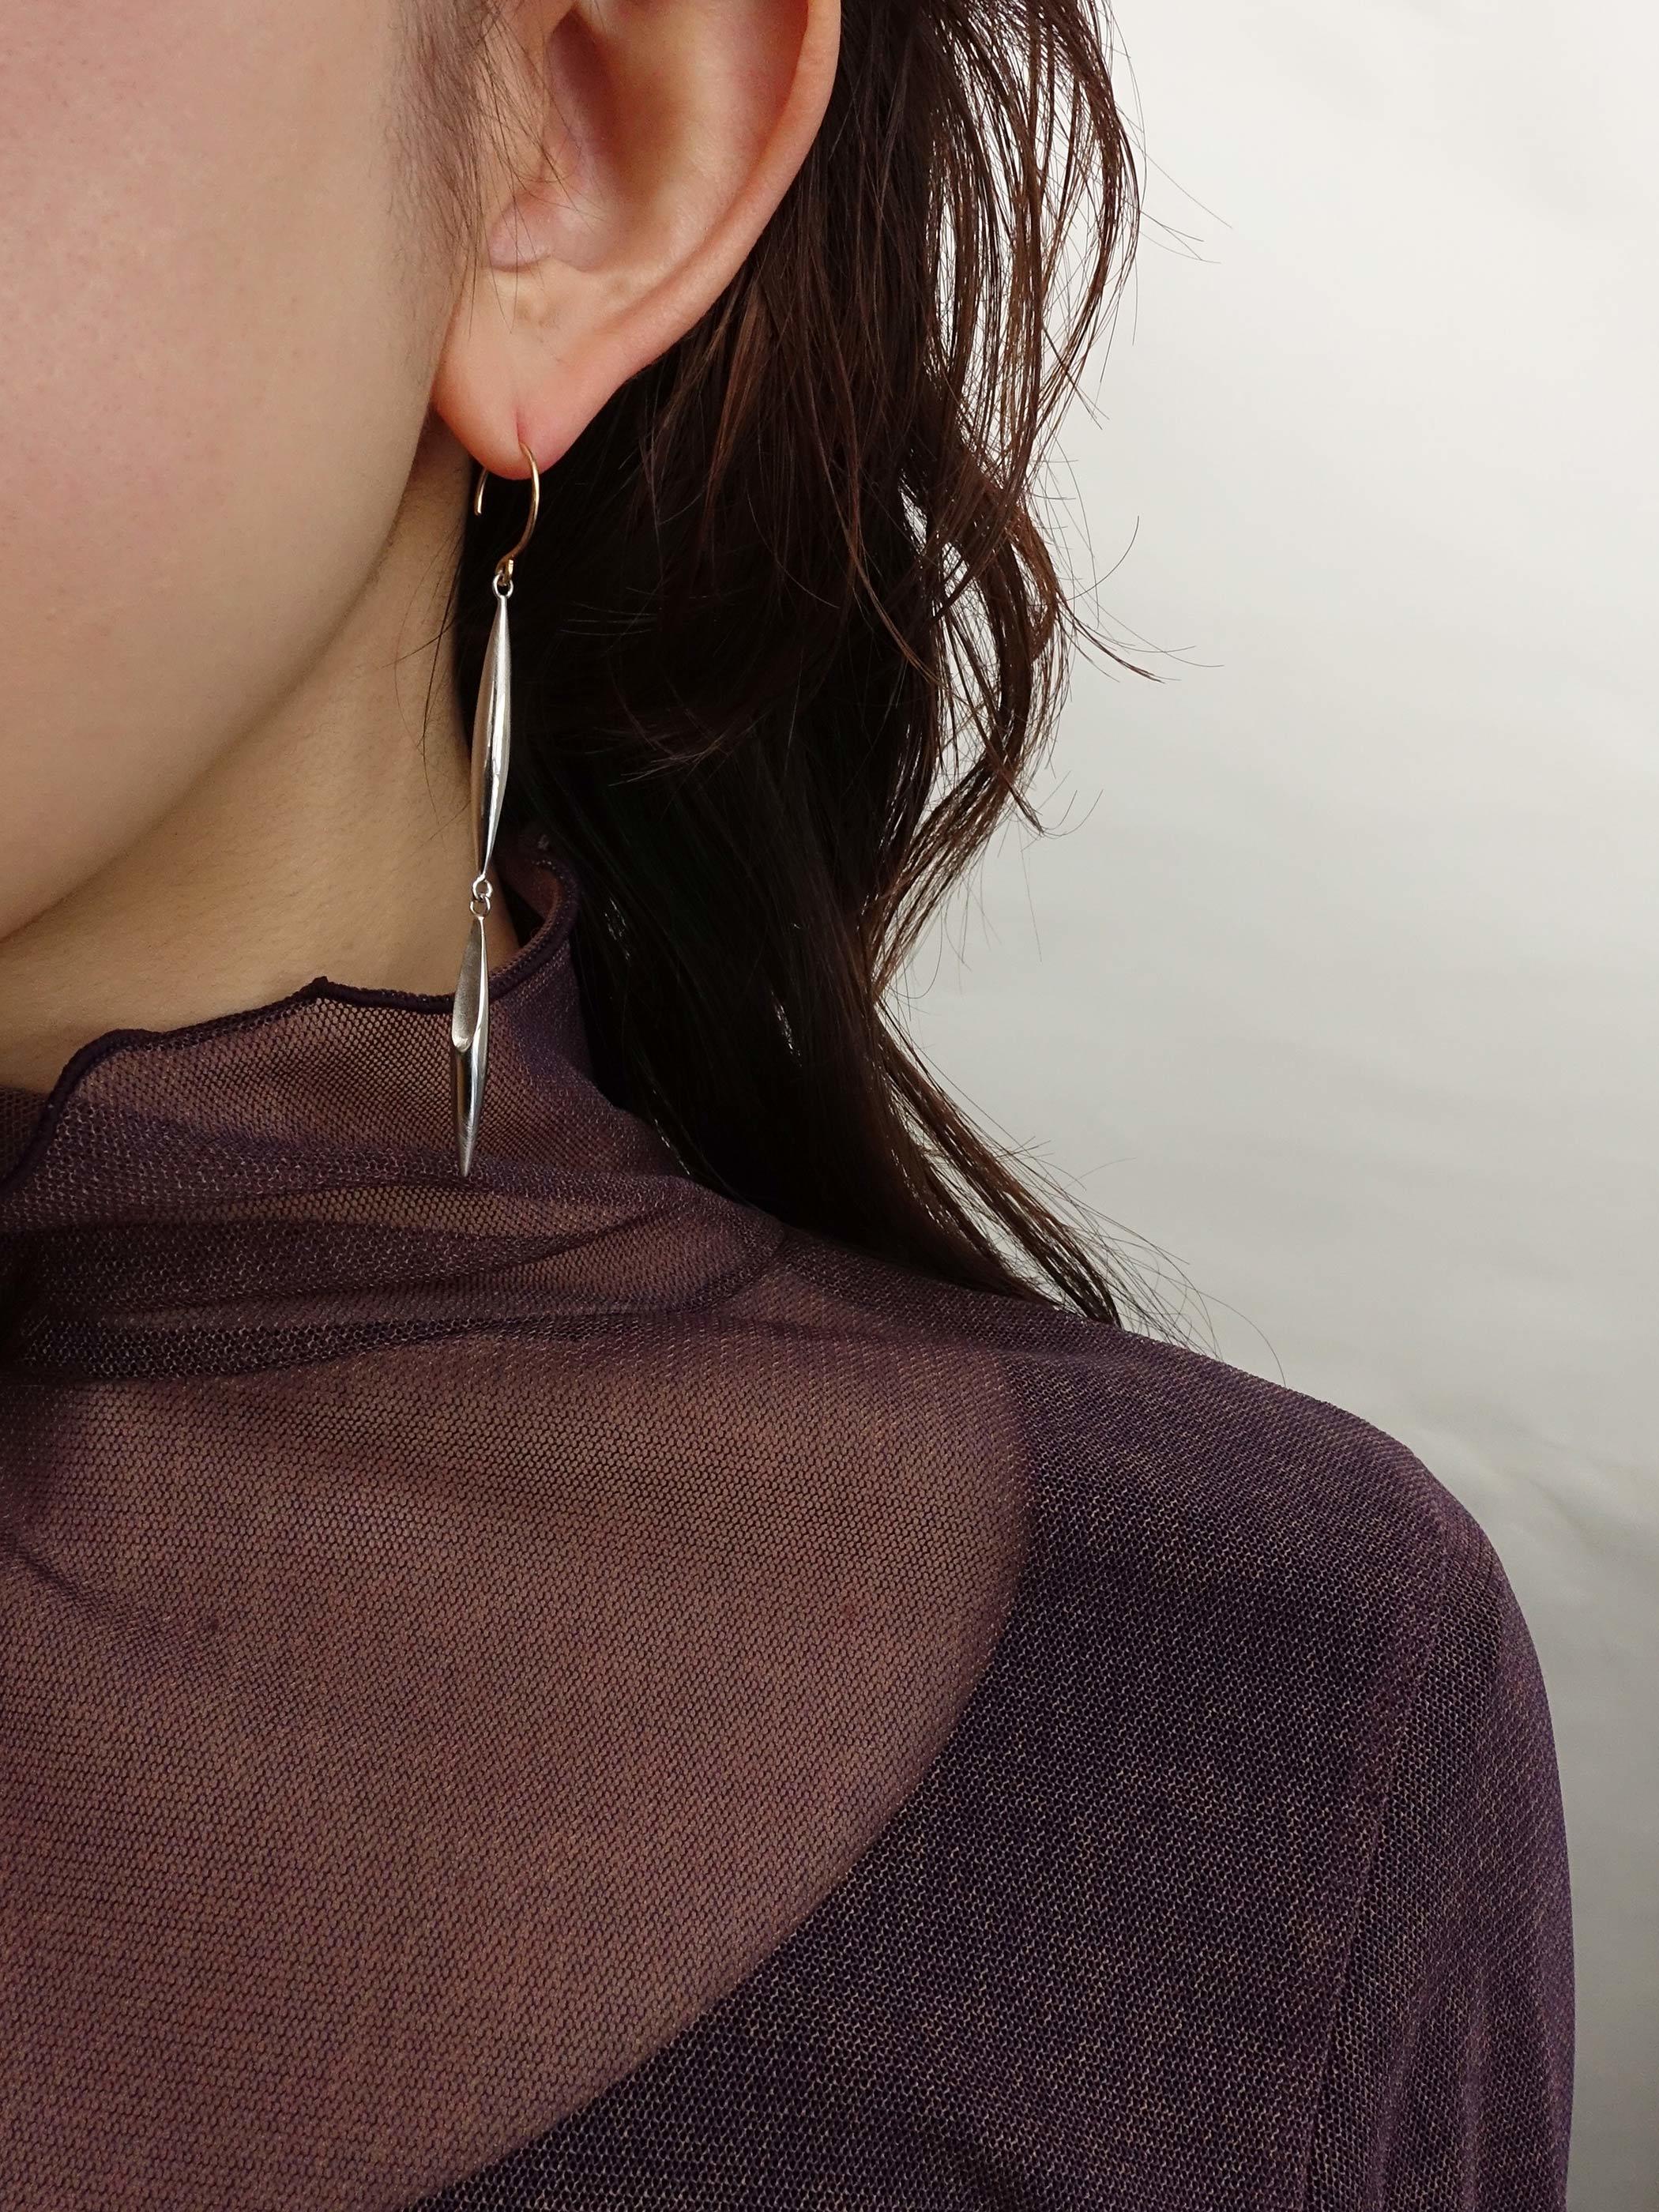 〈RECOLLECTION〉1:3 LINK earring